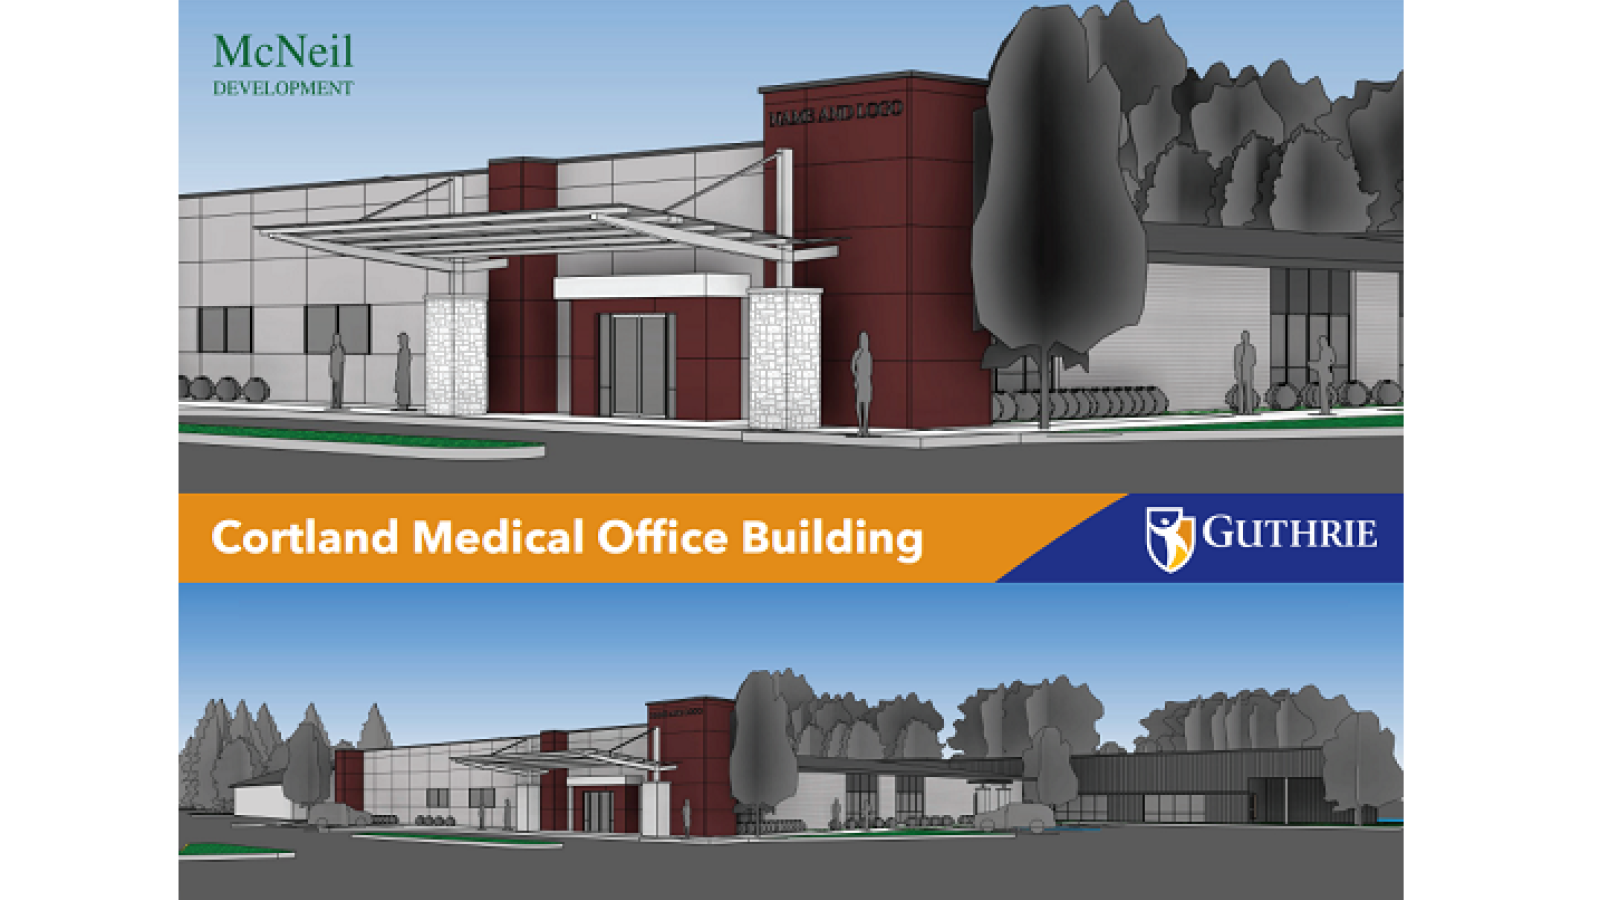 Guthrie Announces Plan for New Medical Ofiice Building in Cortland